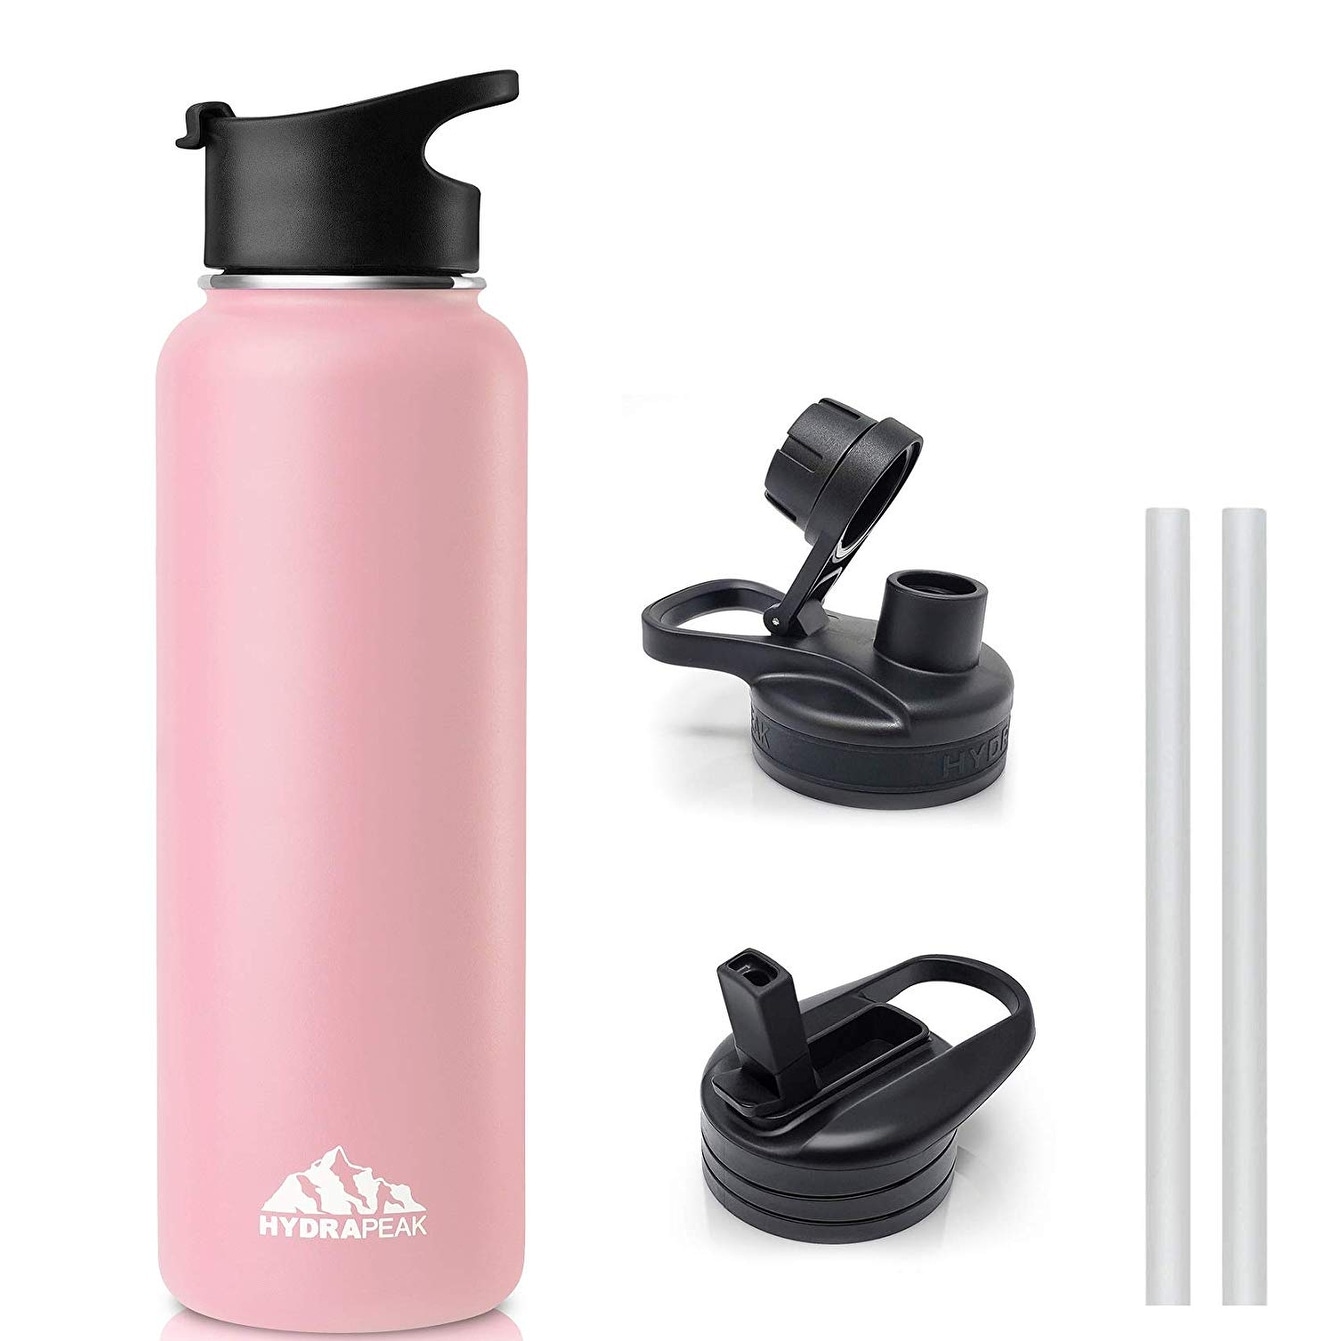  Water Flask Stainless Steel Vacuum Insulated - Flat Lid - Baby  Pink, 32 oz): Home & Kitchen